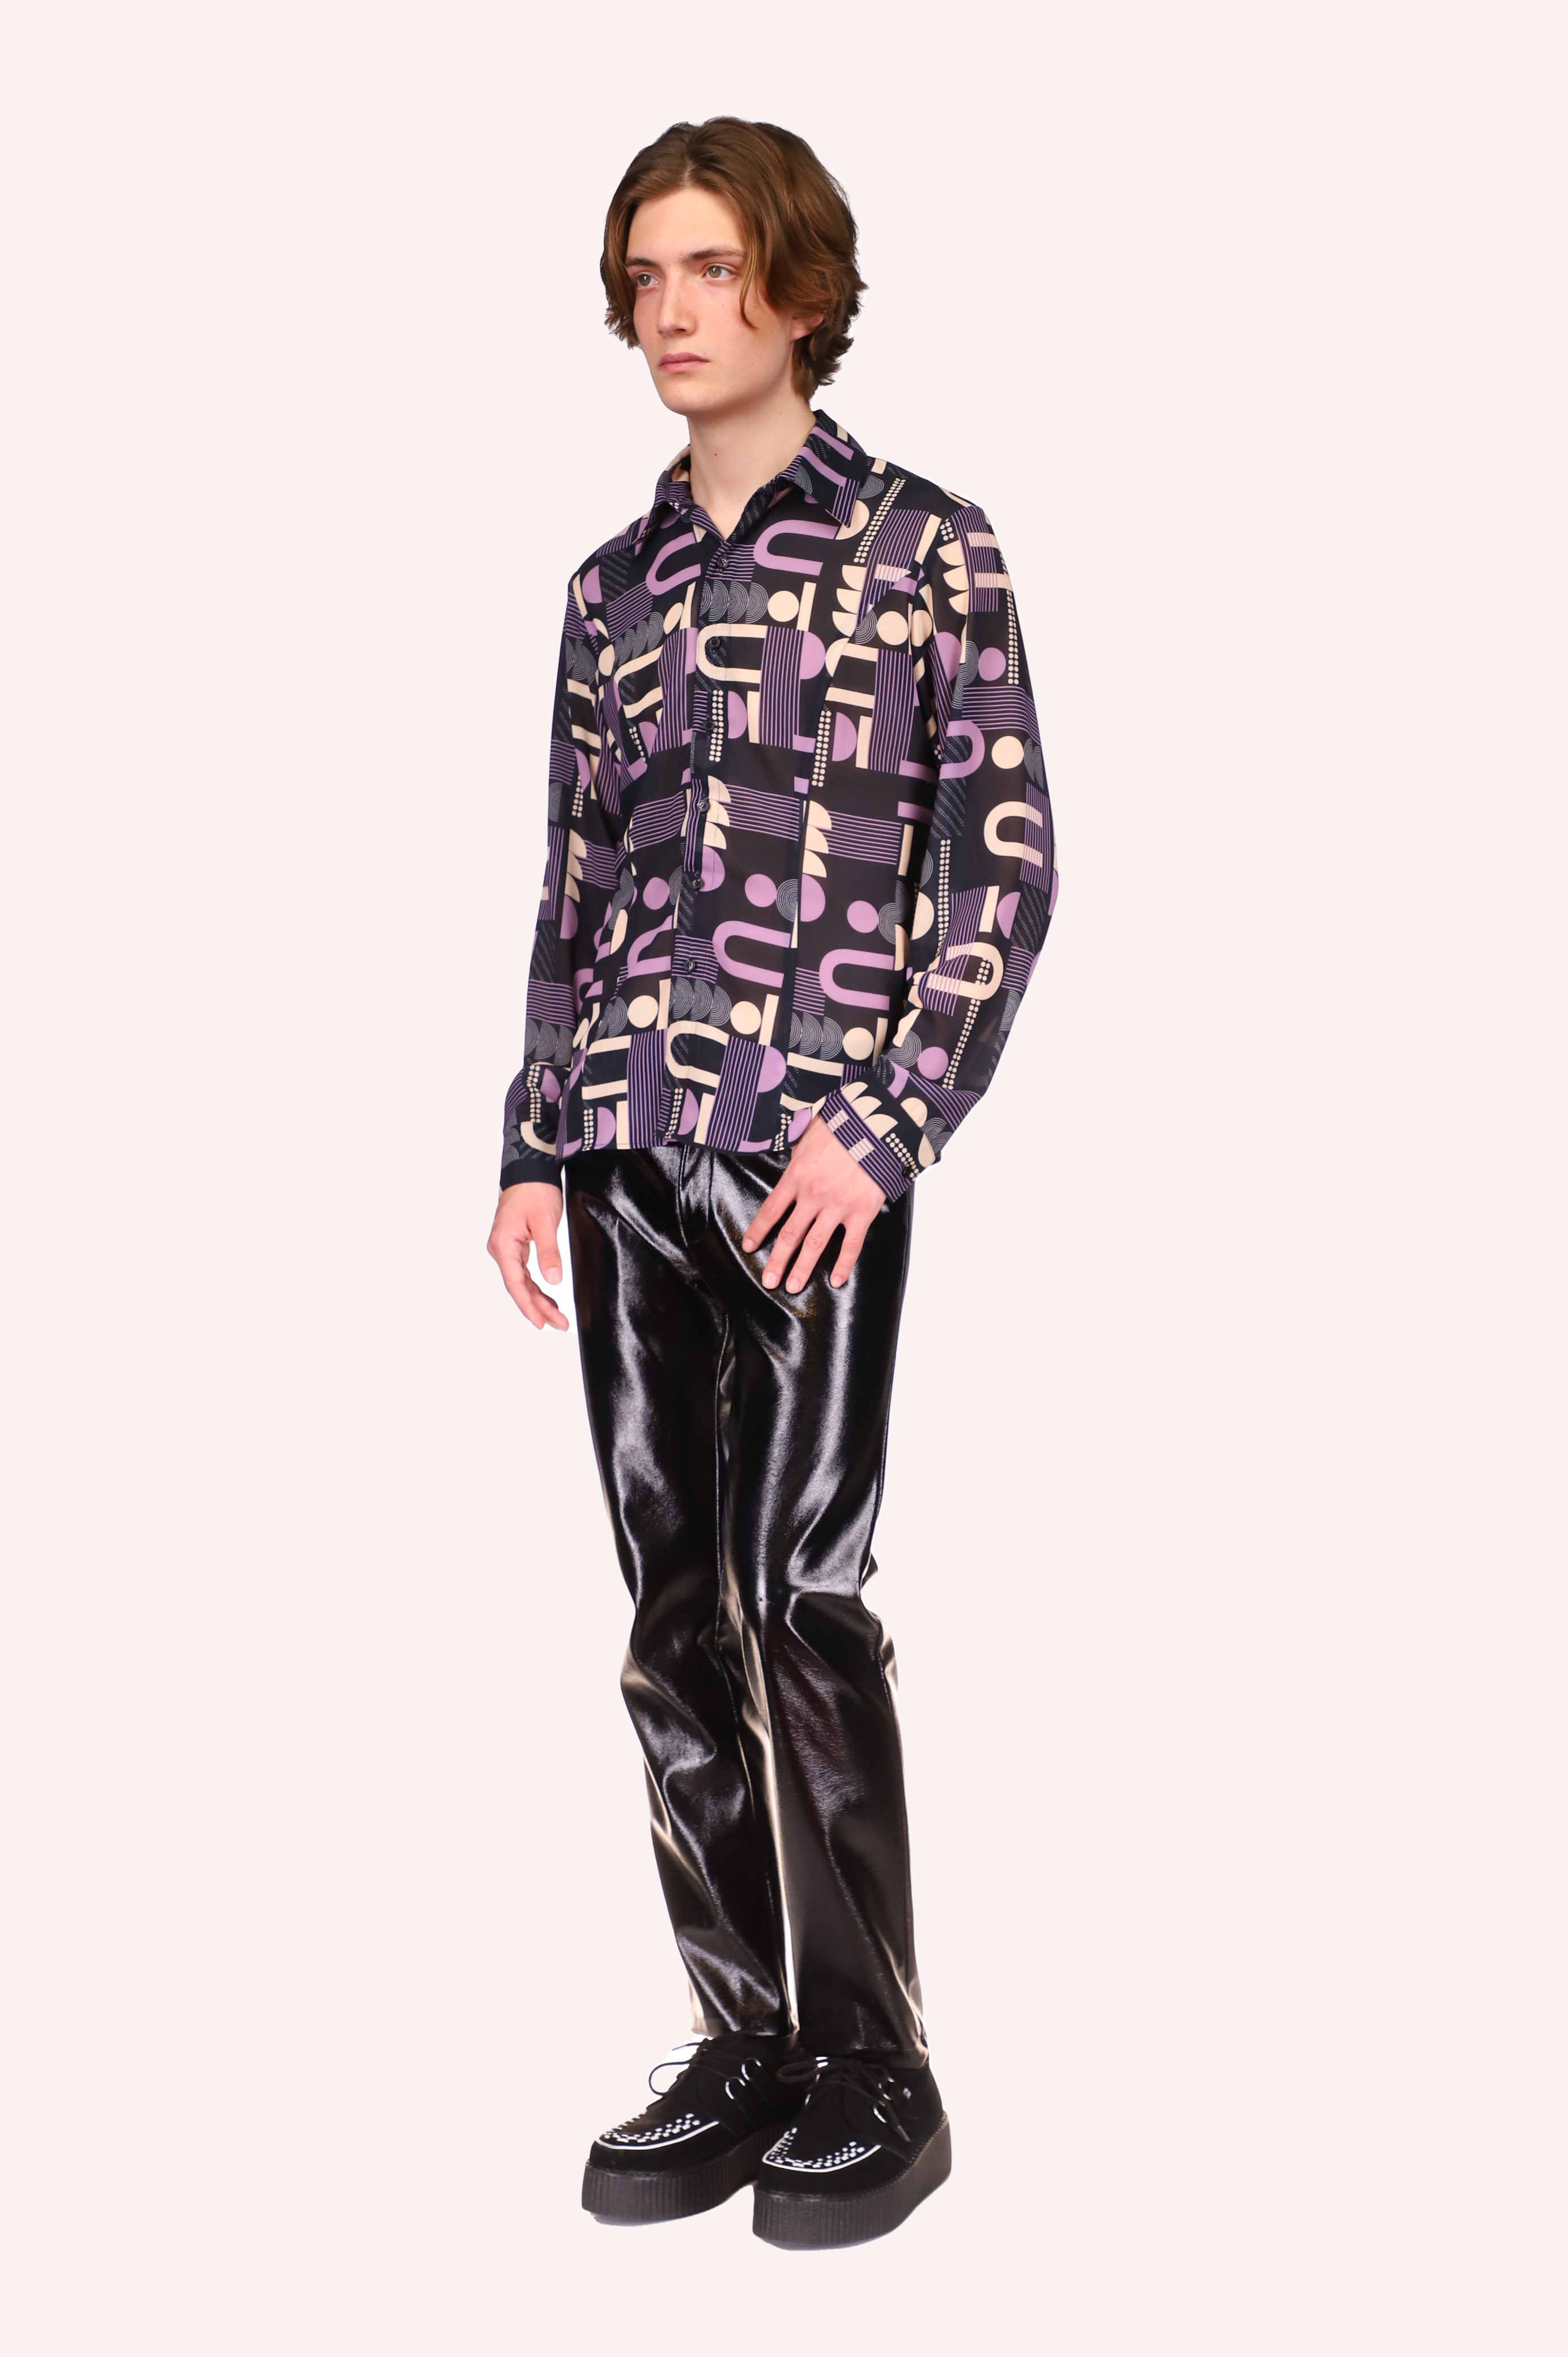 Dancing Deco Button Down Top, long sleeves, disco design such ¼, ½ and full circle , in grey, white and purple, 